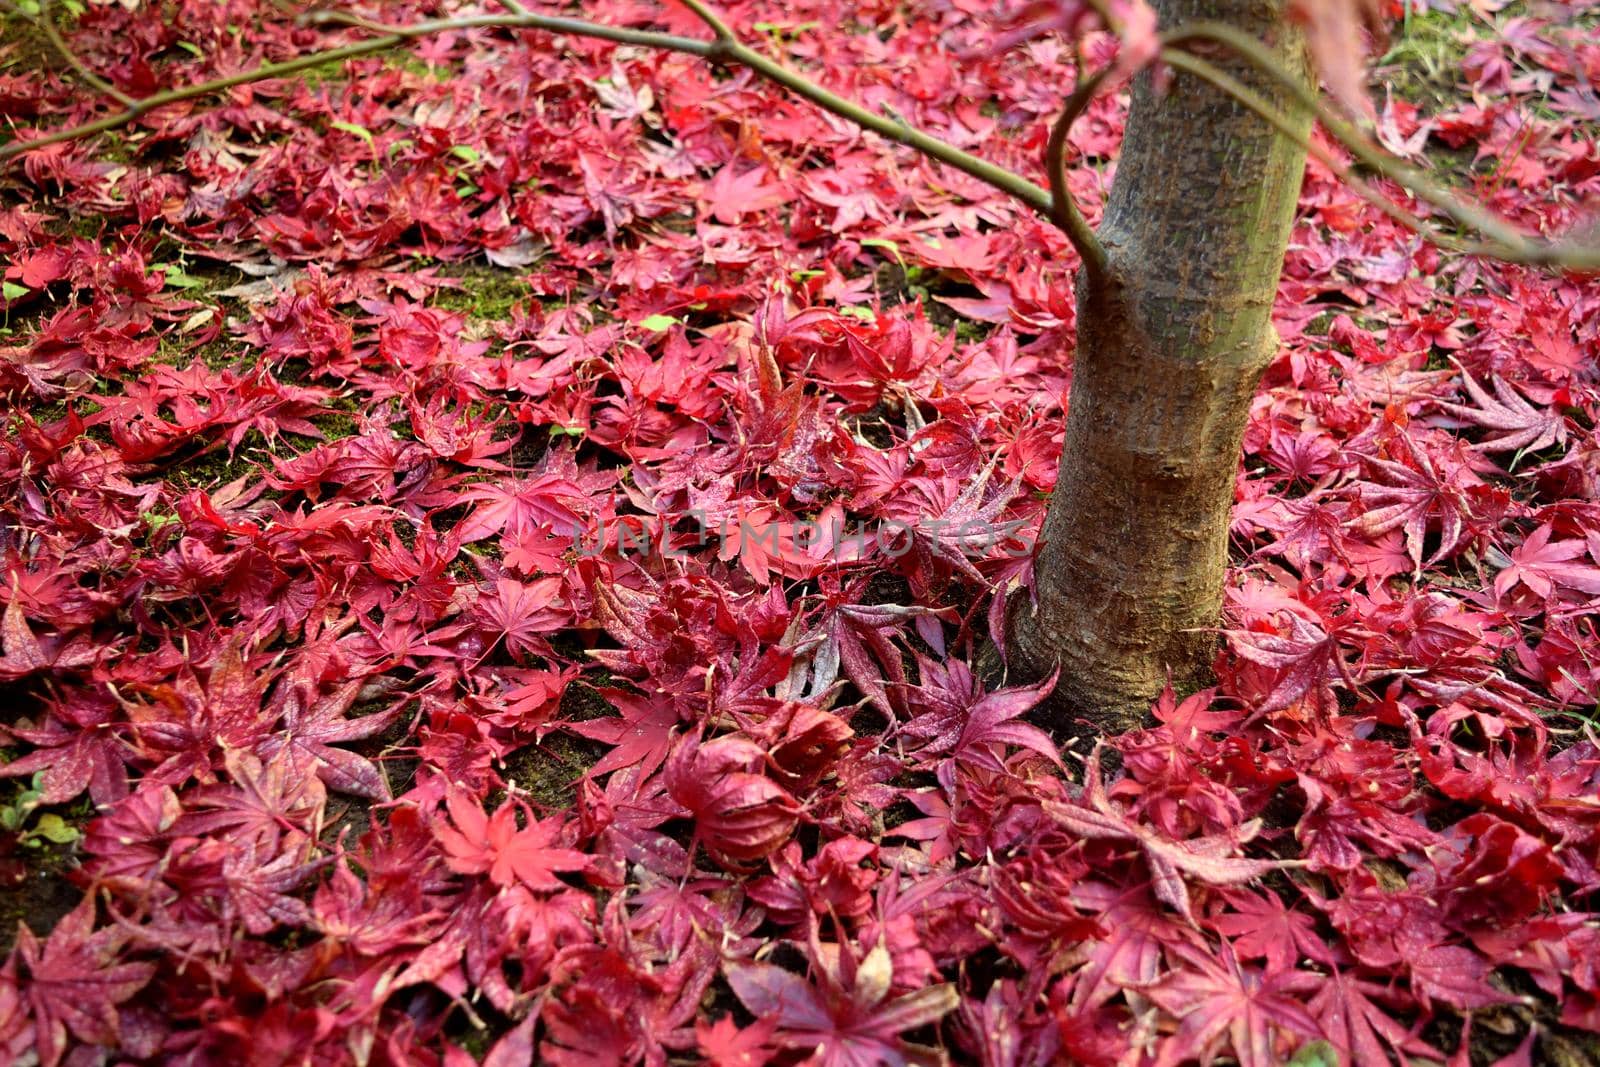 Closeup of Japanese maple leaves with classic fall colors falling to the ground.